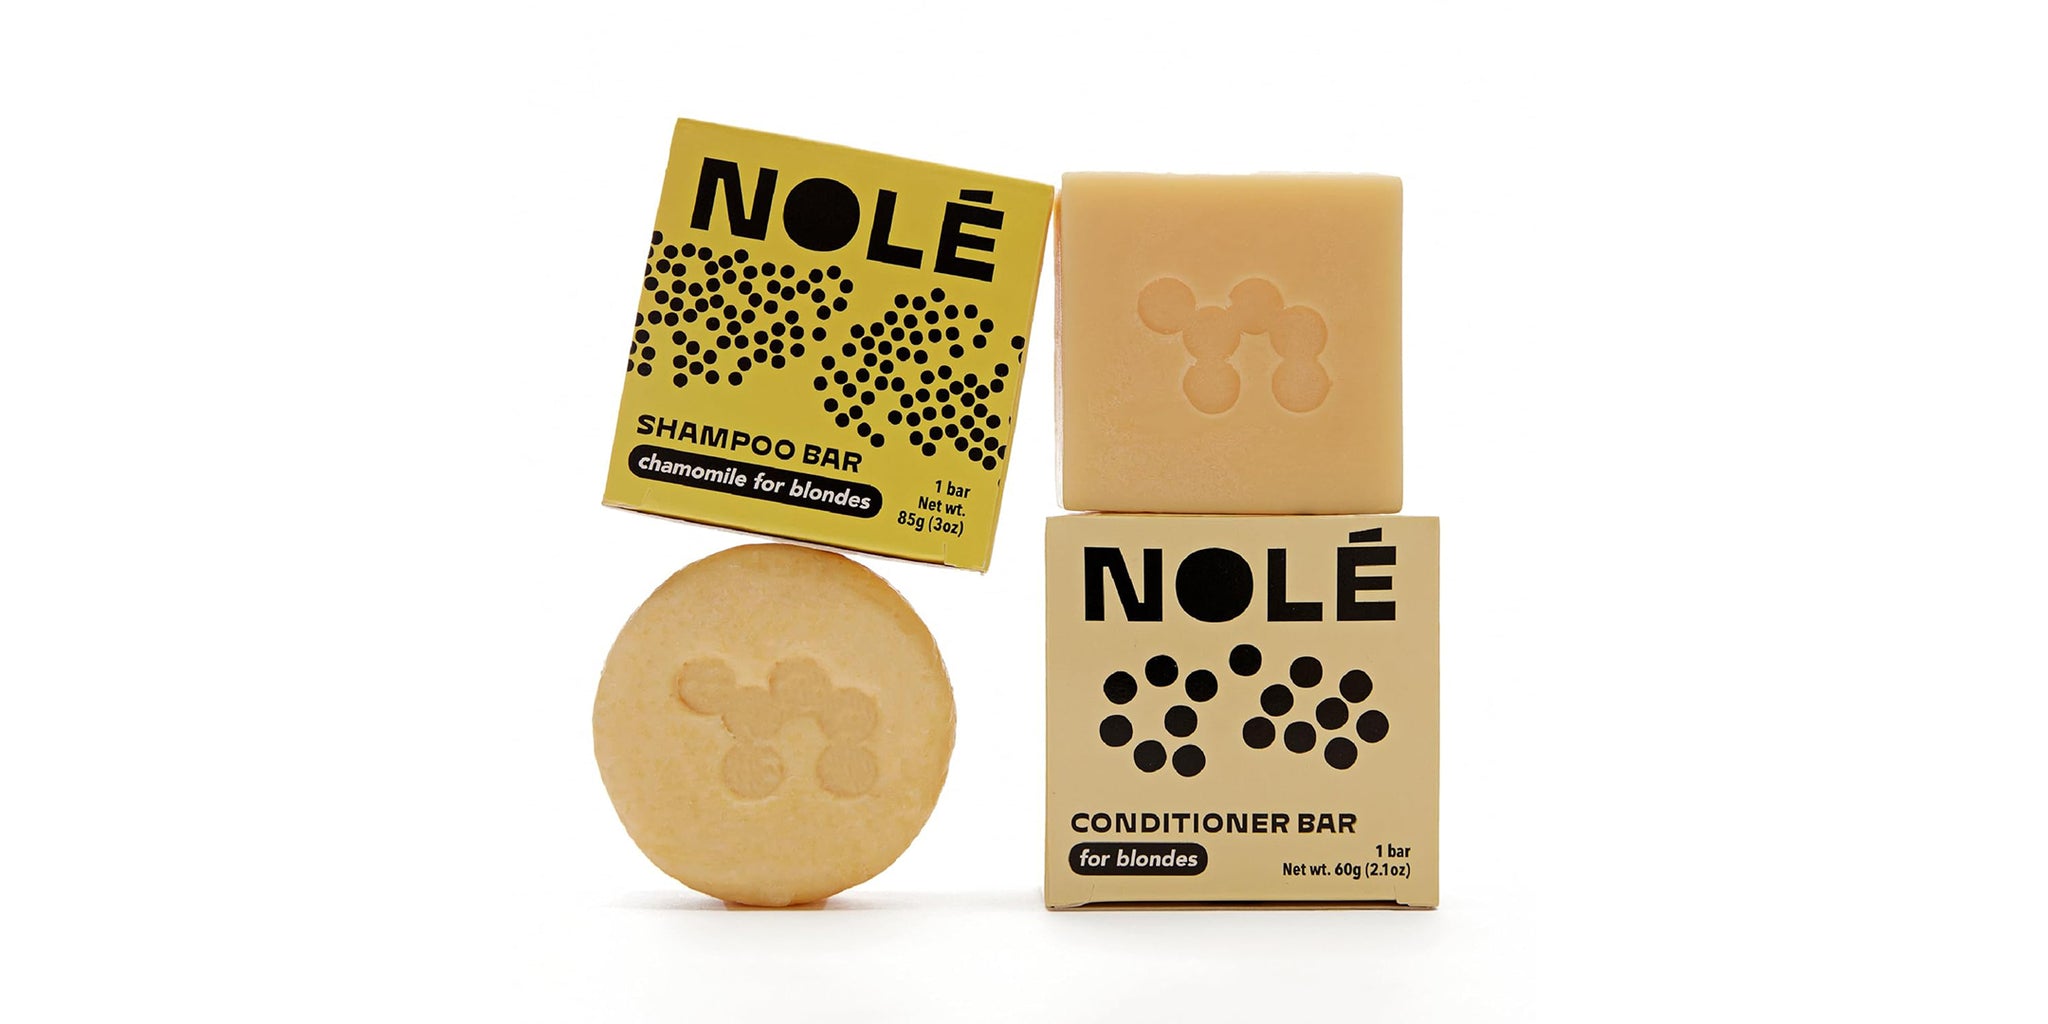 Shampoo and Conditioner Bar - Chamomile For Blondes